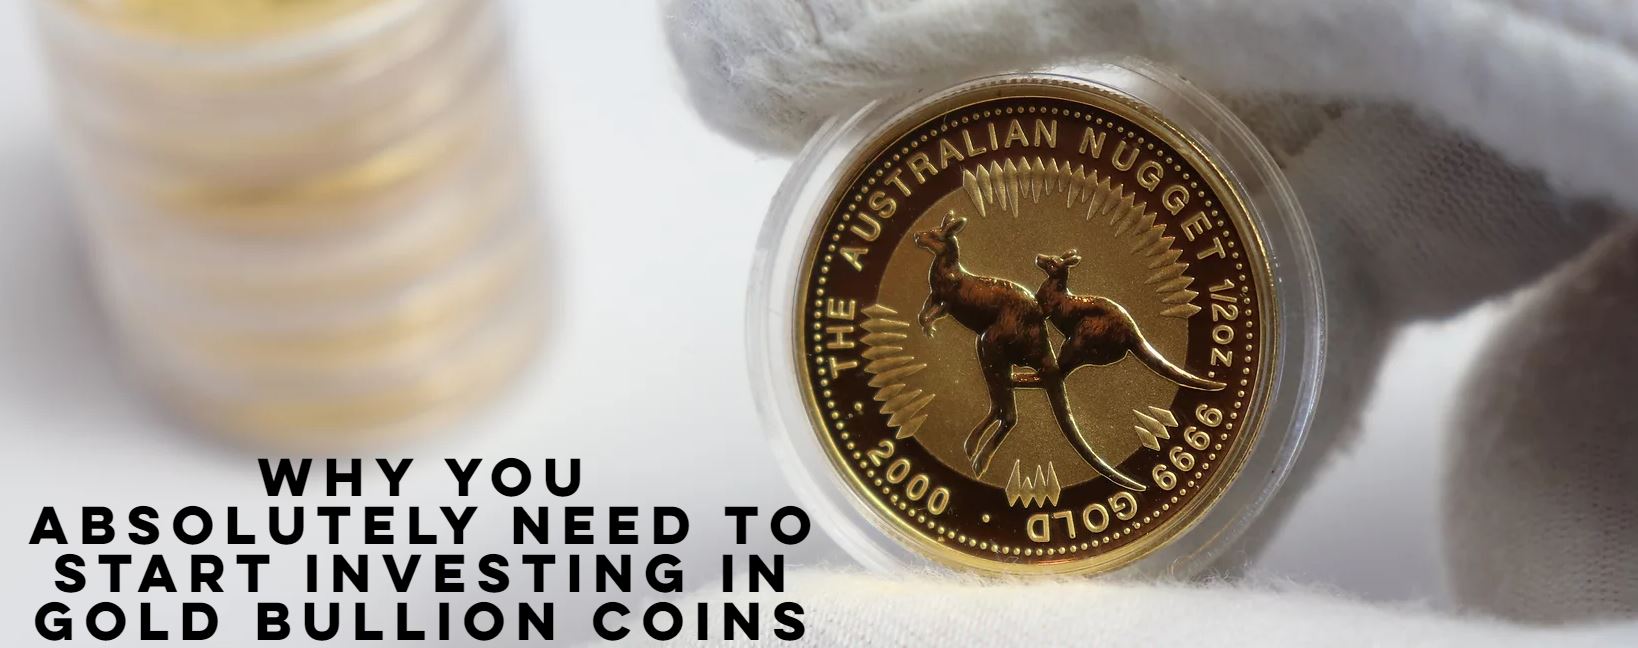 Why You Absolutely Need to Start Investing in Gold Bullion Coins